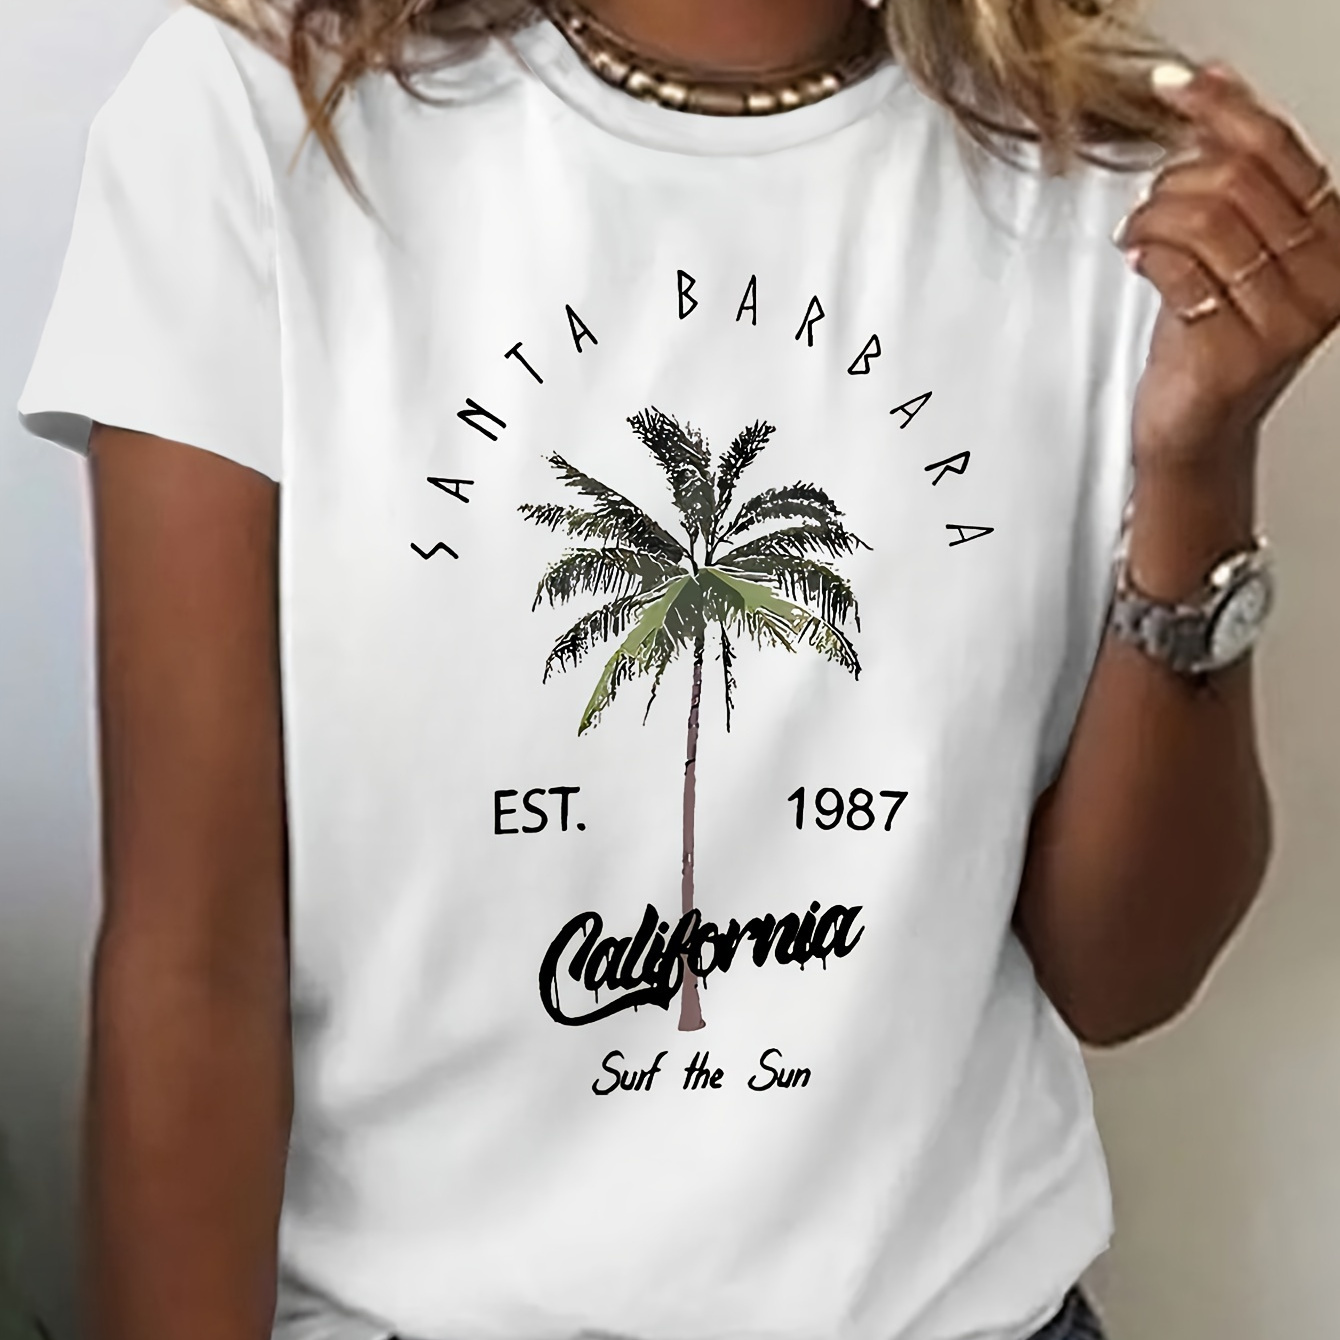 

Coconut Tree Print T-shirt, Casual Crew Neck Short Sleeve Top For Spring & Summer, Women's Clothing